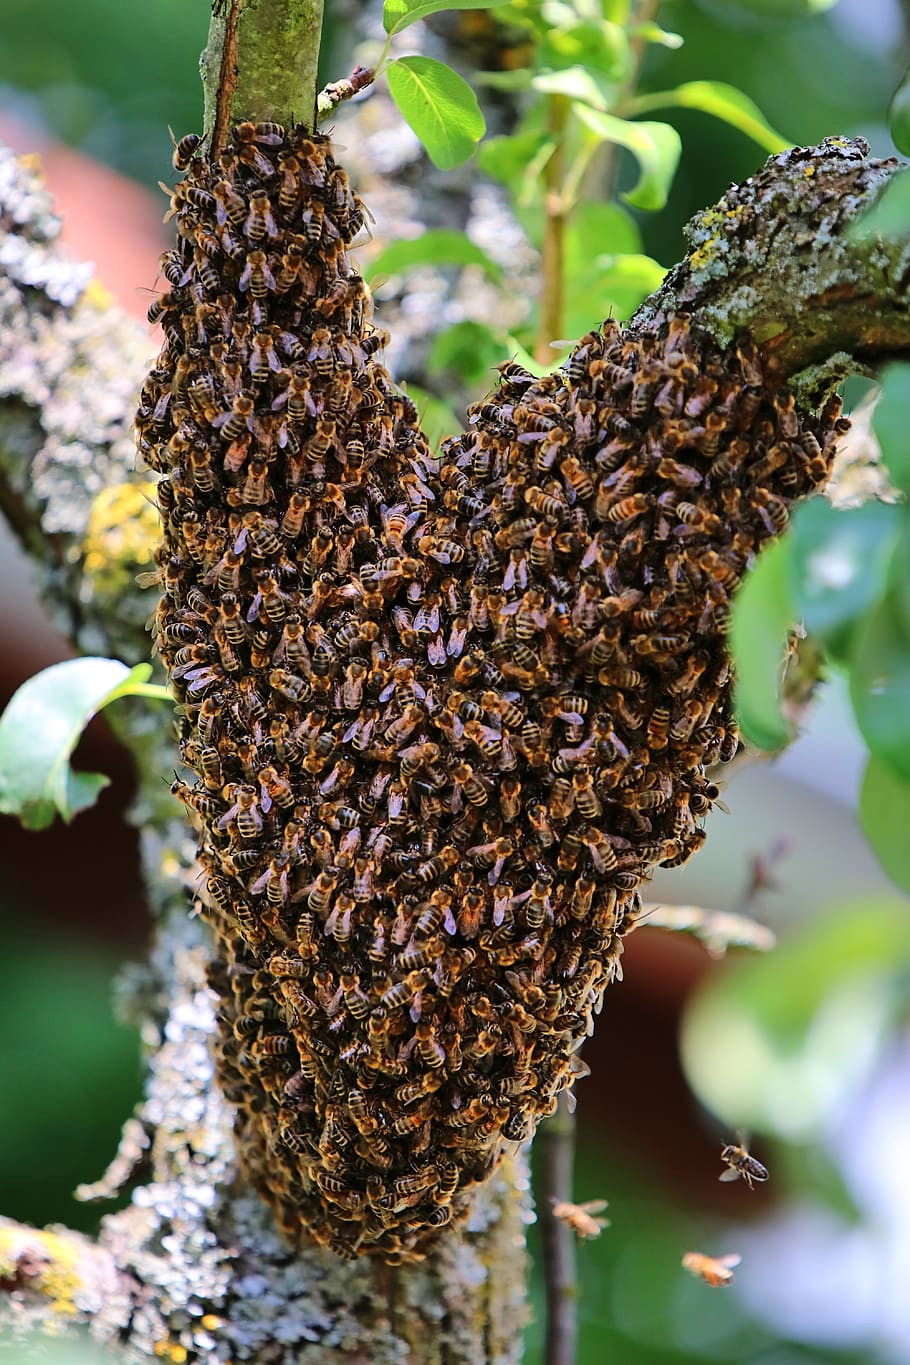 bees, swarm, tree, escaped, invertebrate, close-up, insect